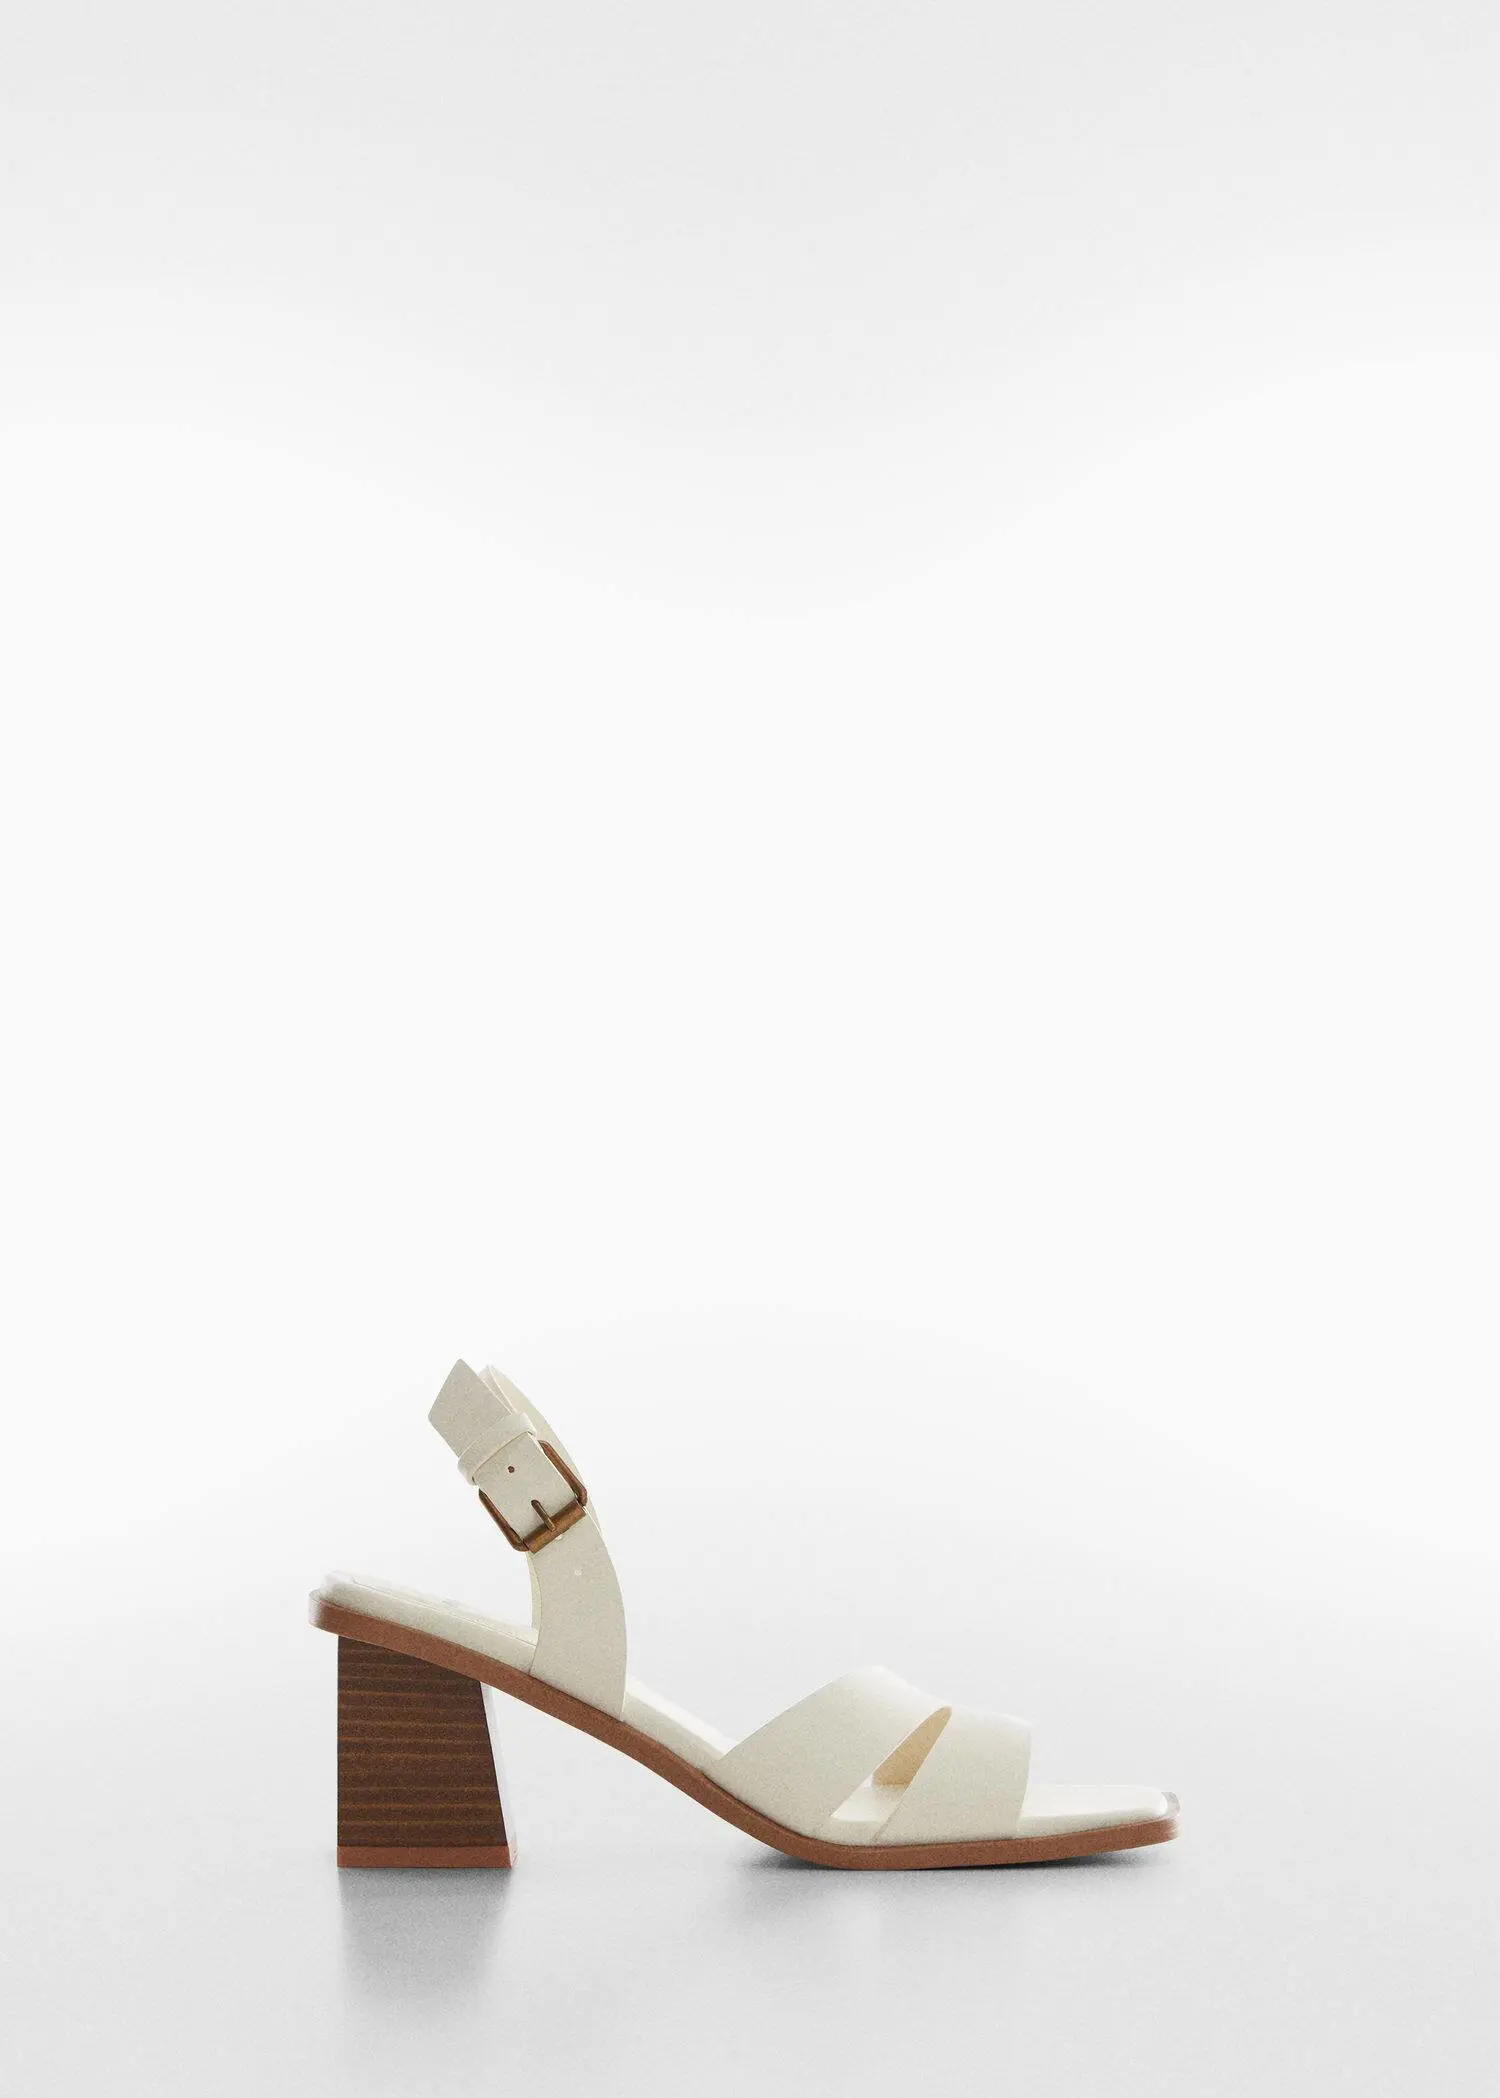 Mango Block-heel sandals. a pair of white shoes on a white background. 